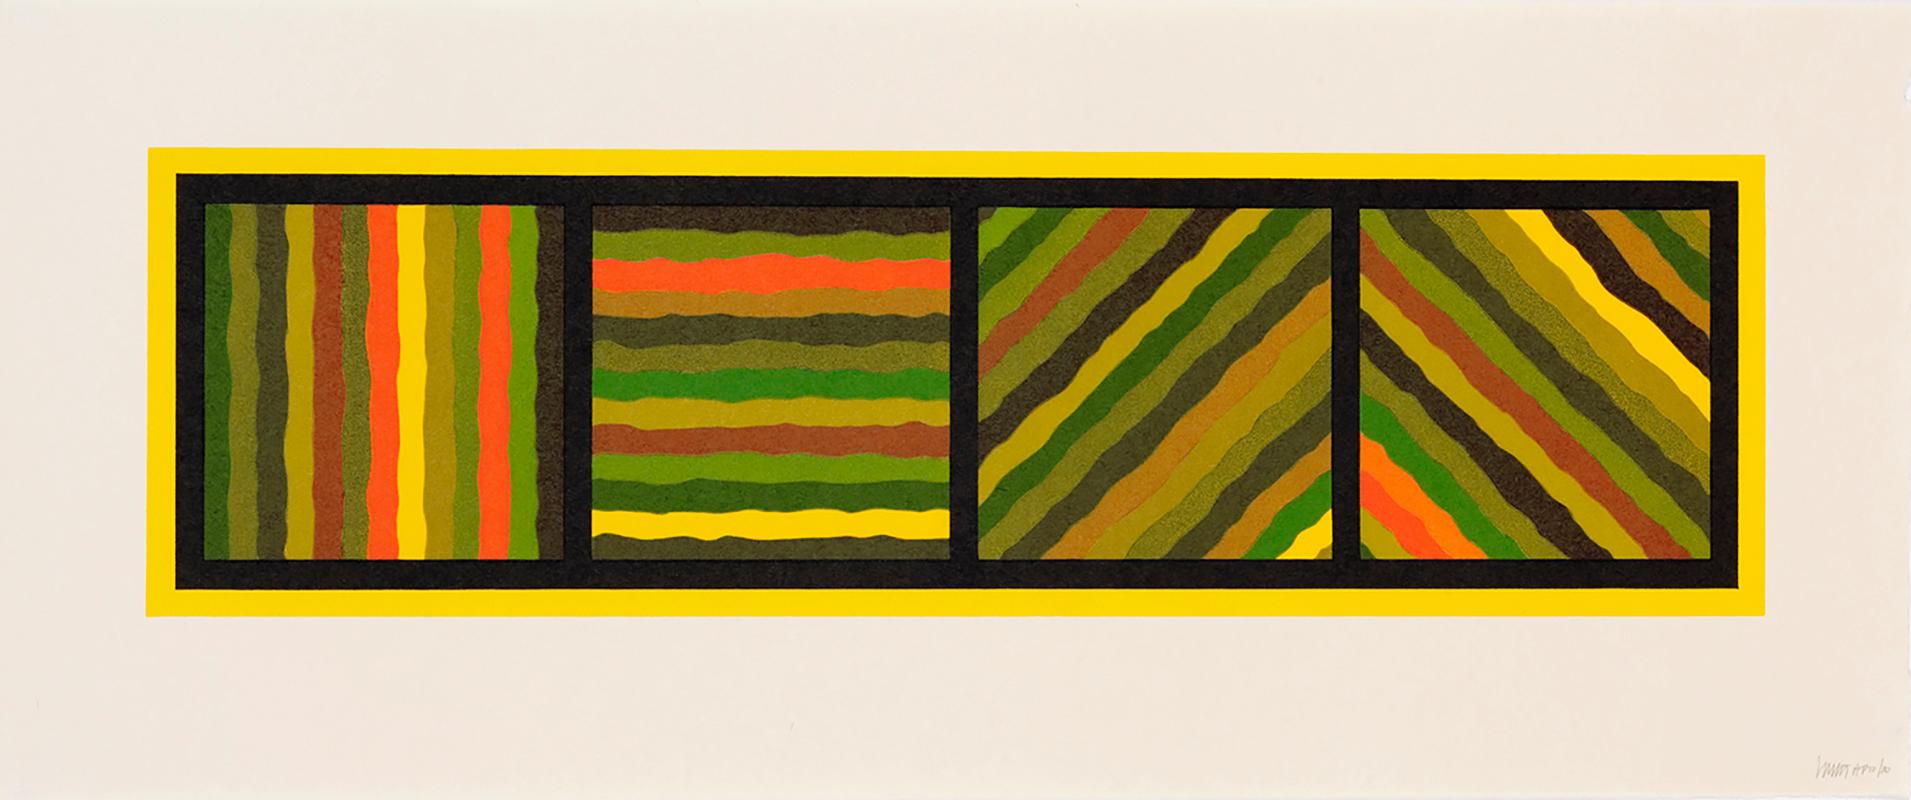 Bands (not straight) in Four Directions - Sol LeWitt, Prints, Woodcut, Abstract. 1